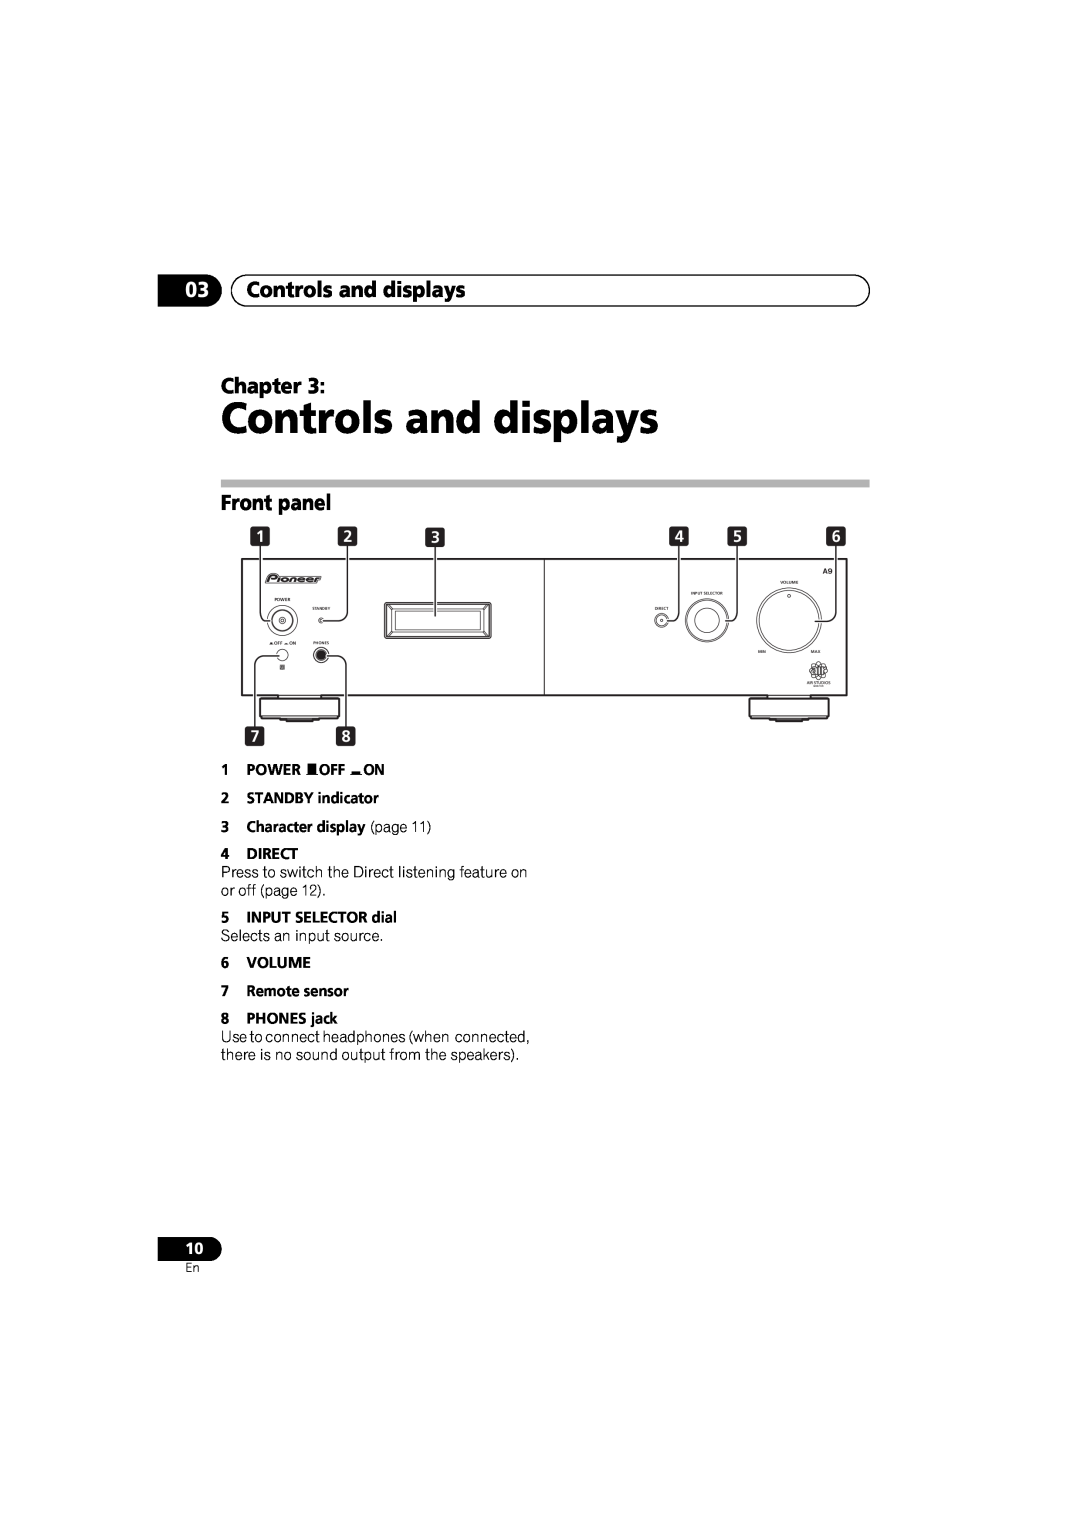 Pioneer A-A9-J manual 03Controls and displays Chapter, Front panel, 1POWER OFF ON 2STANDBY indicator 